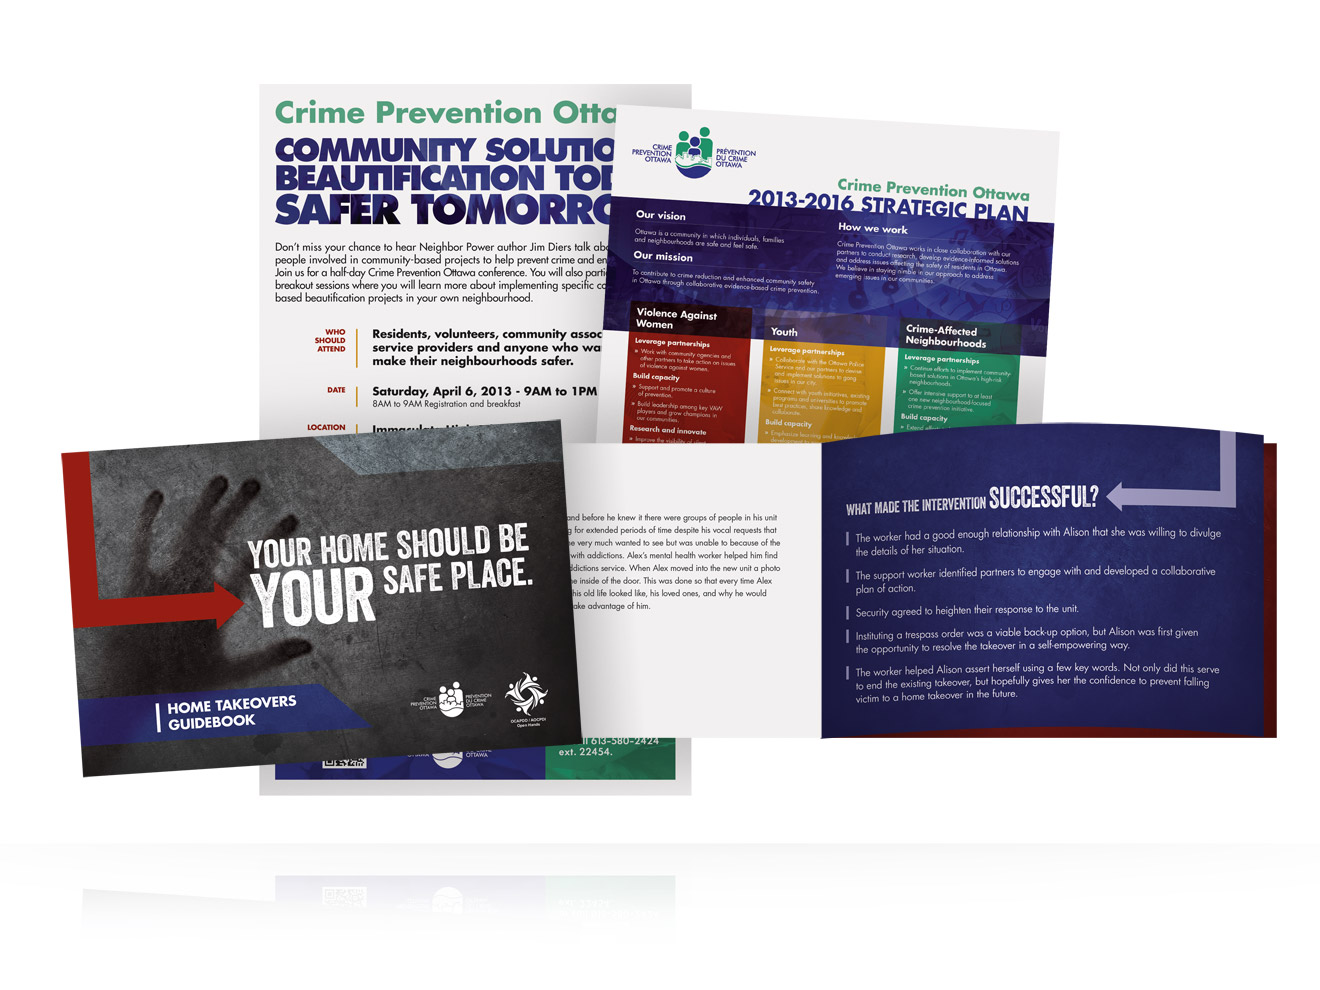 Crime Prevention Ottawa print material, Home Takeover Guidebook